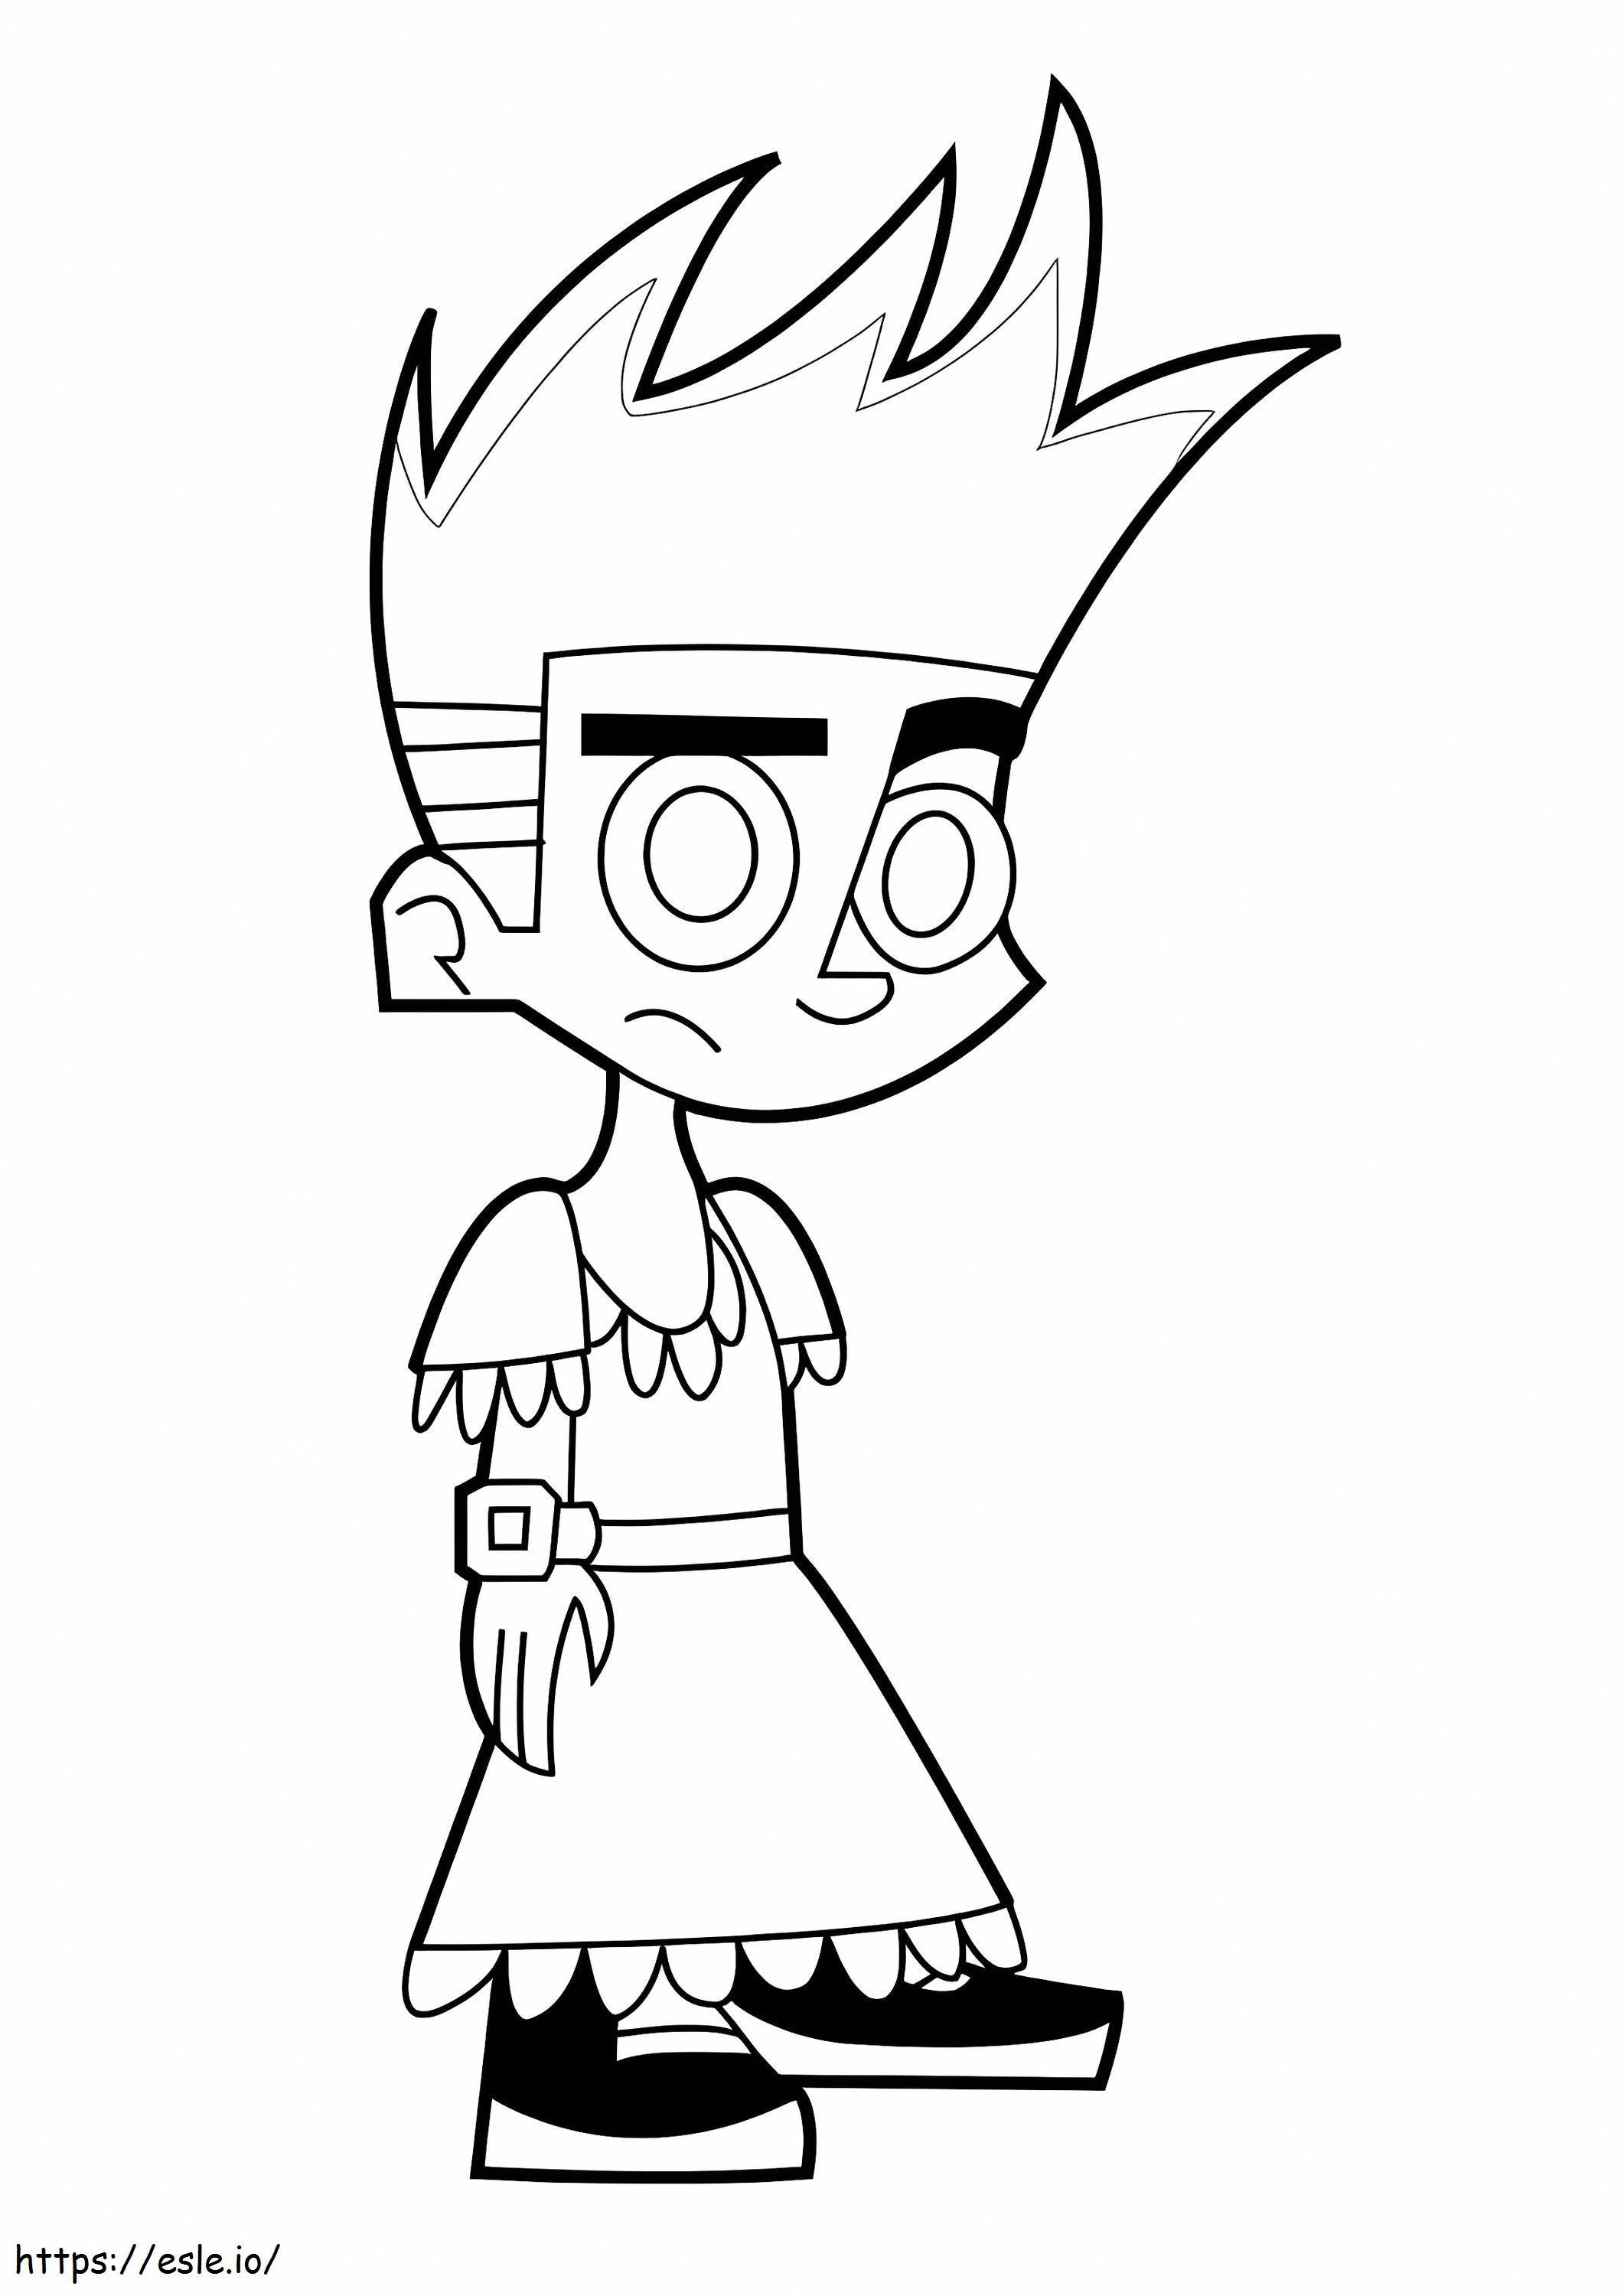 Lovely Johnny Test coloring page